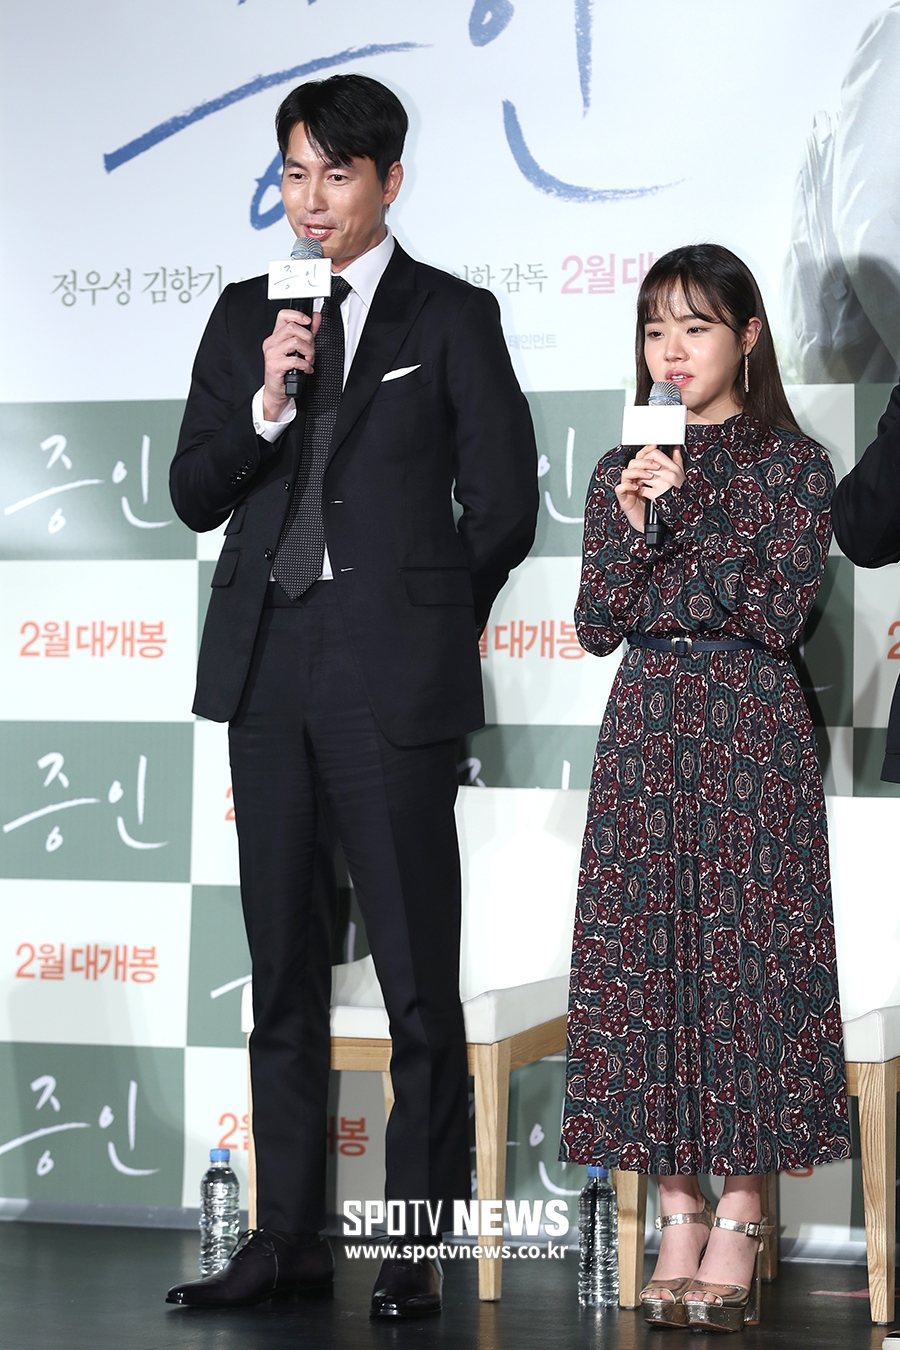 The film Witness production meeting was held at the entrance of Lotte Cinema Counter in Jayang-dong, Gwangjin-gu, Seoul on the afternoon of the 10th.Actors Jung Woo-sung and Kim Hyang Gi are taking the oath.